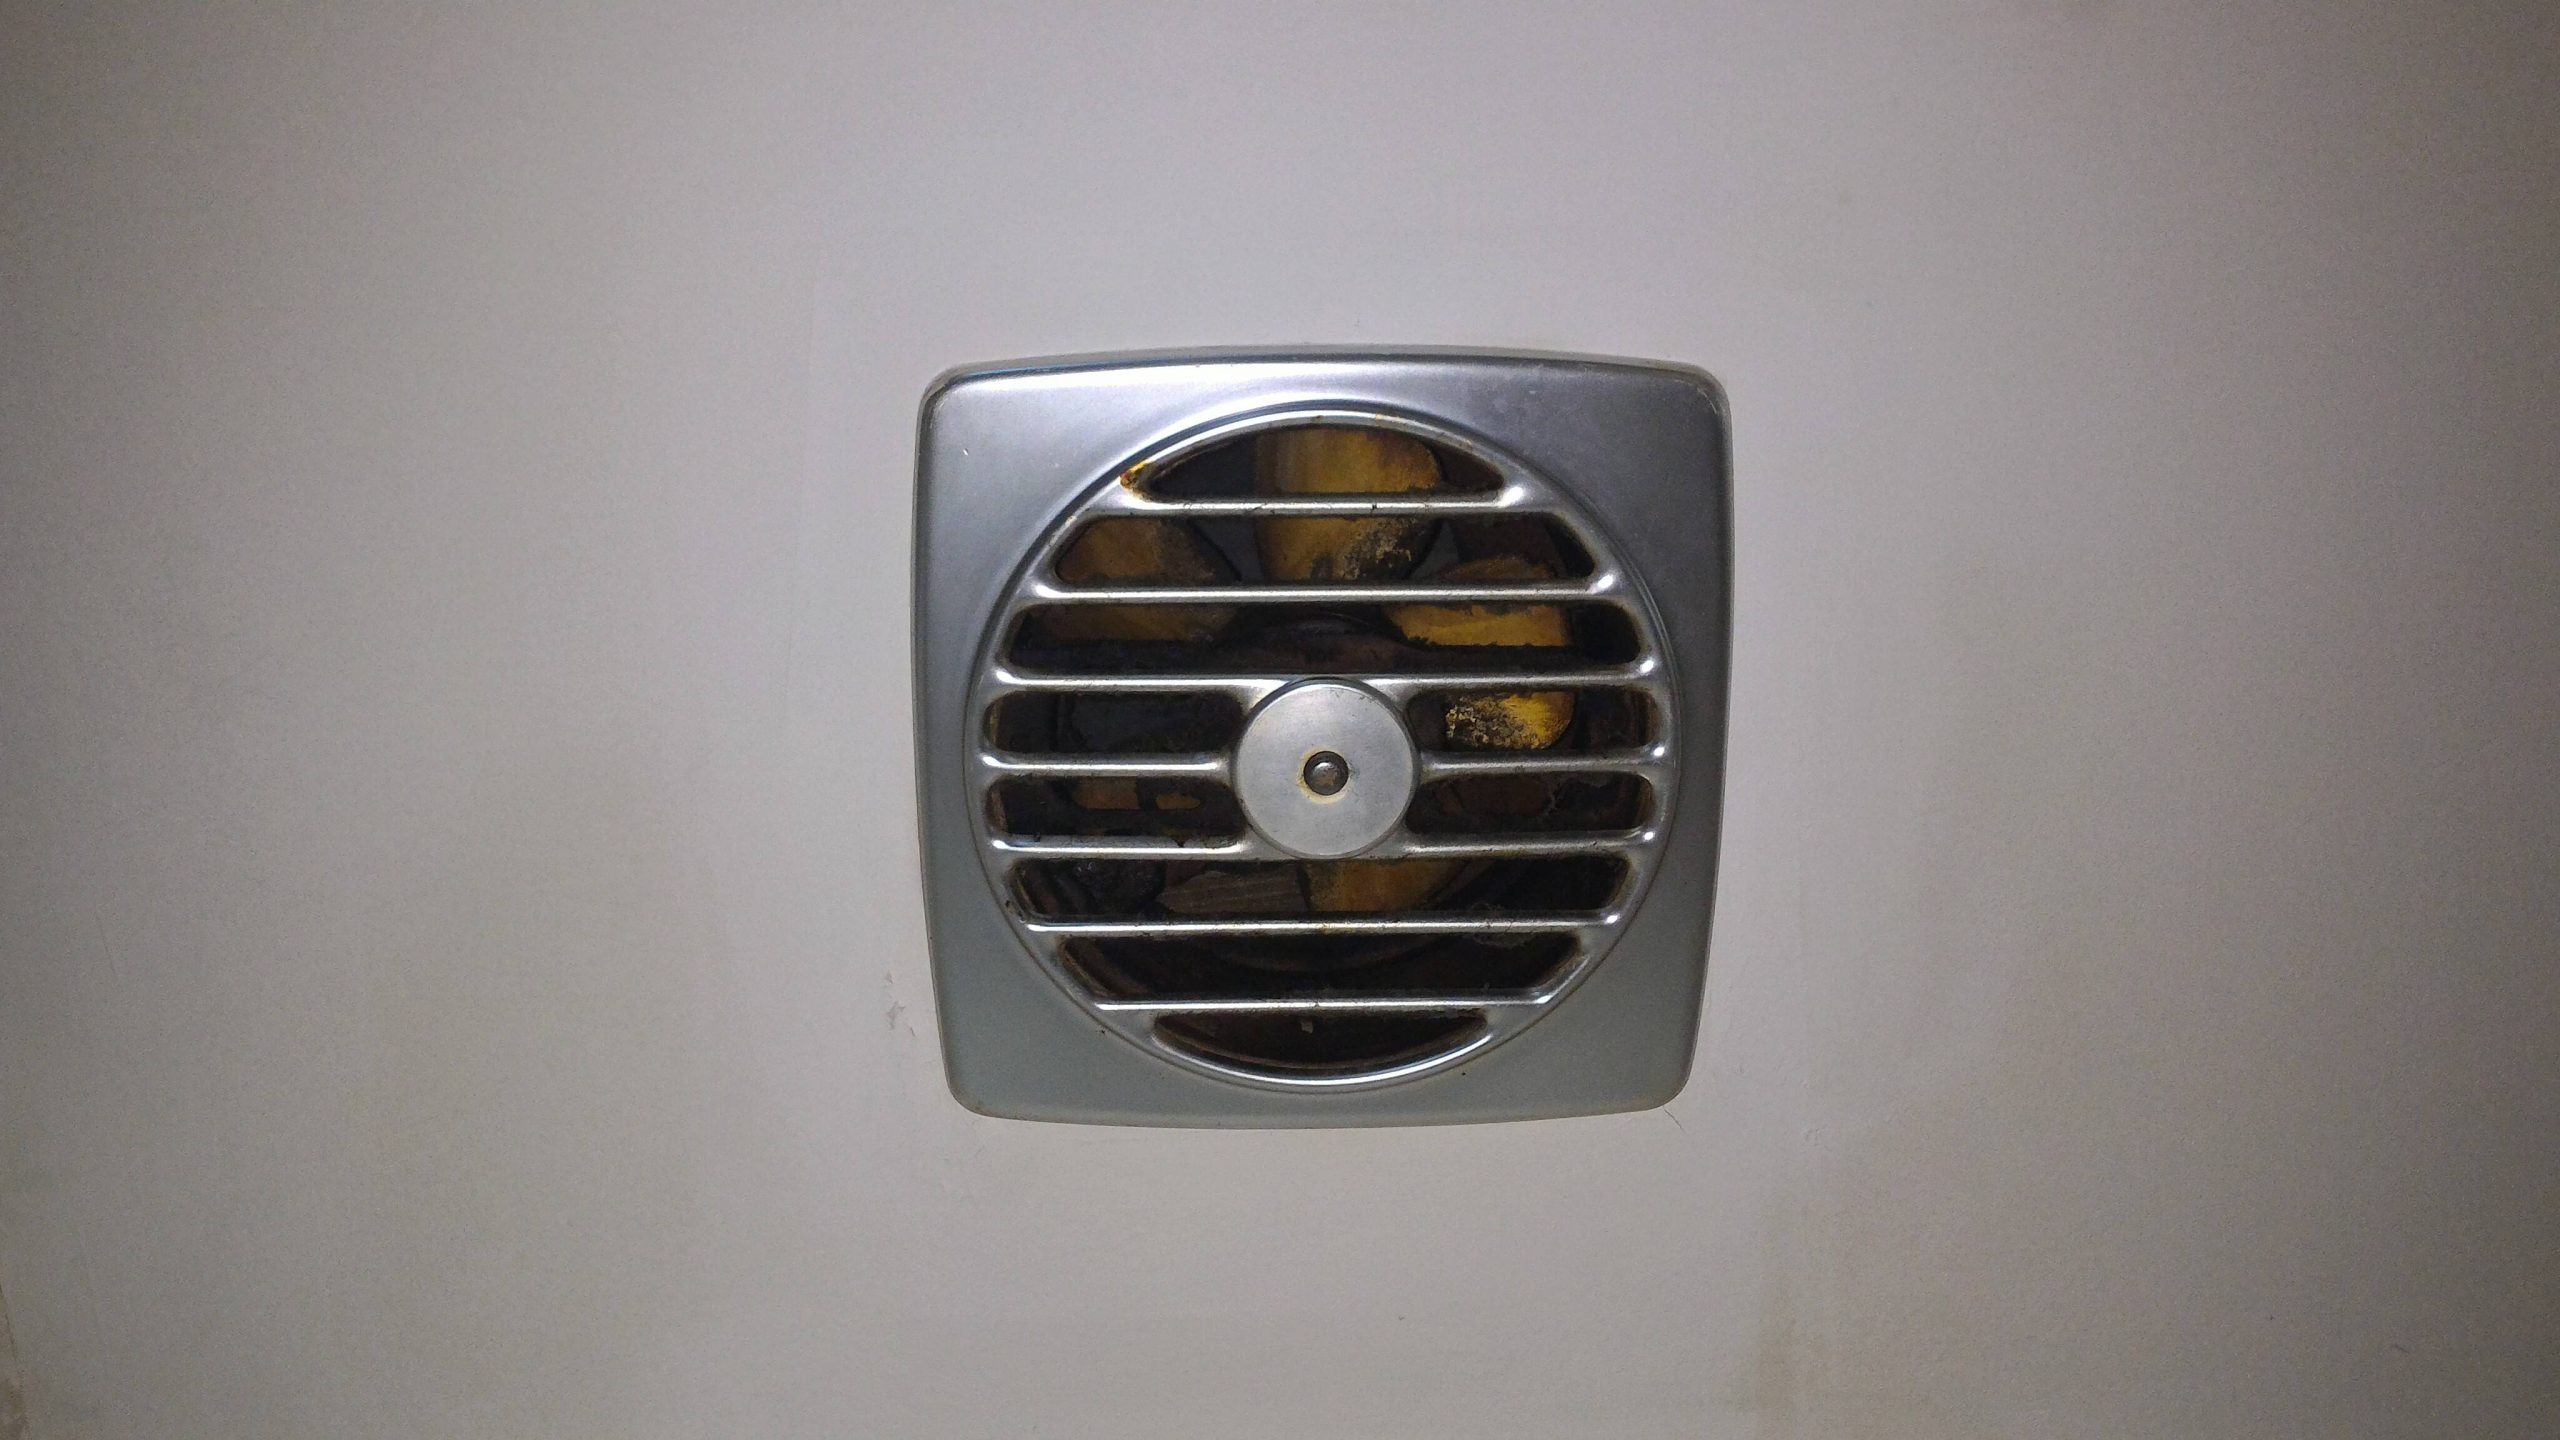 Ceiling Exhaust Fan In Kitchen Home Improvement Stack Exchange with size 4096 X 2304